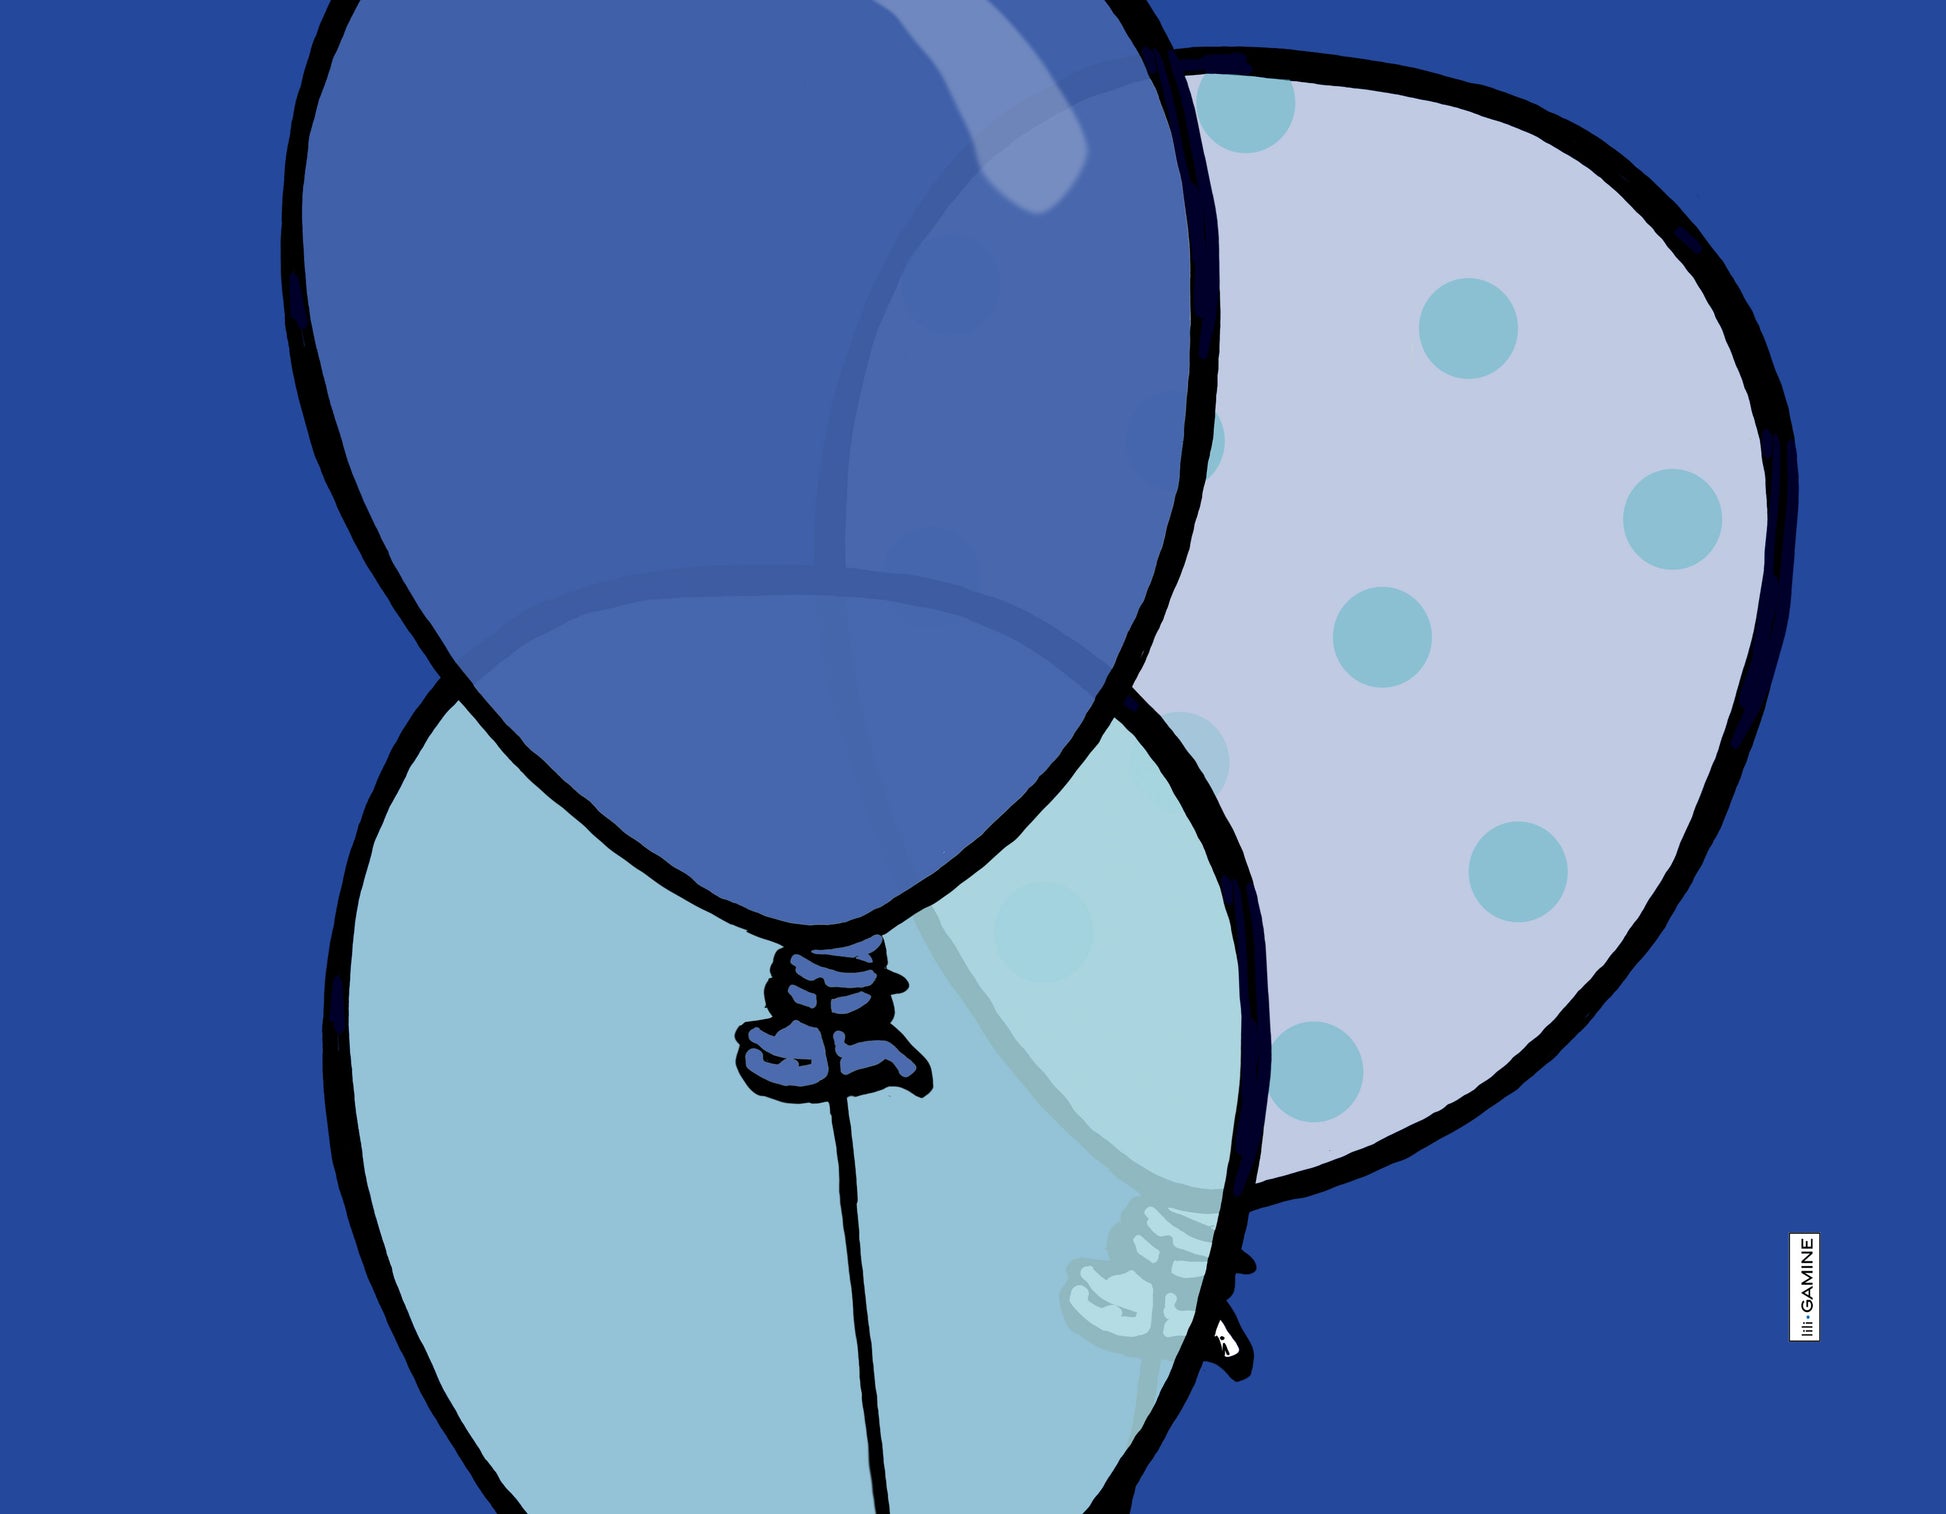 Balloons on a Blue Background by Lili Gamine